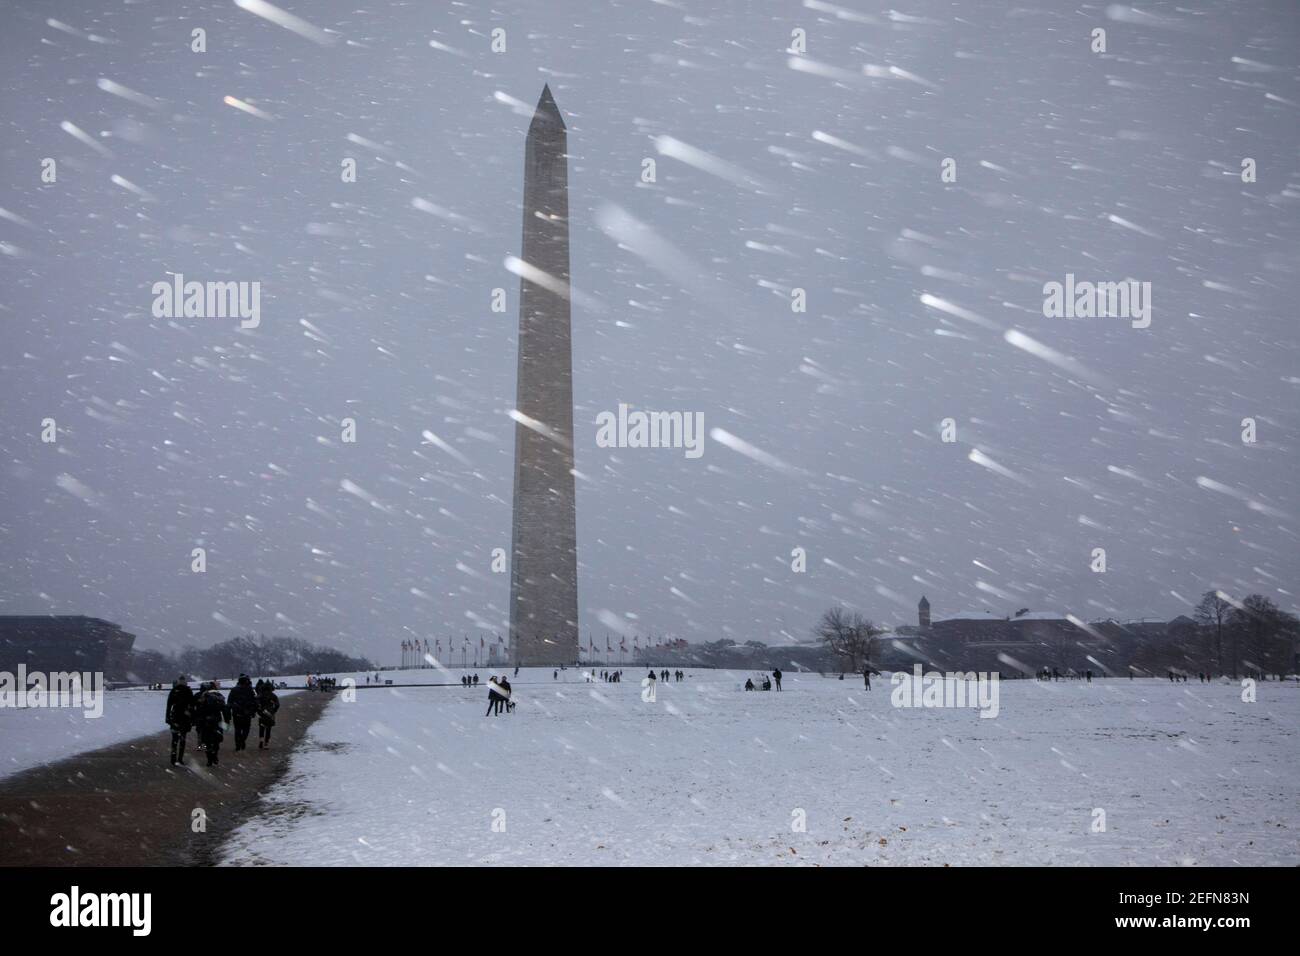 Snow blankets the National Mall and Washington Monument in DC. Stock Photo